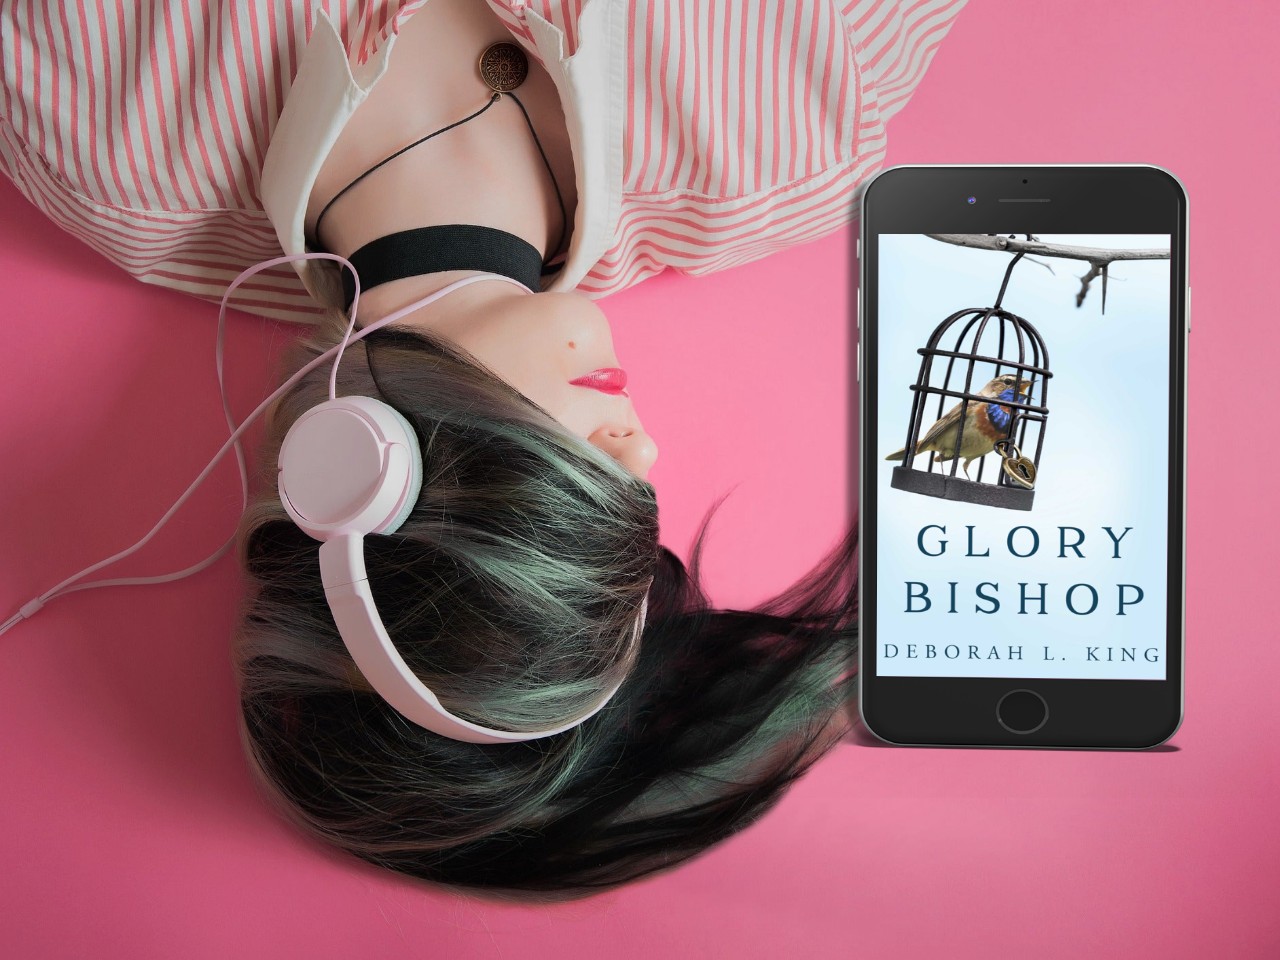 Out in the world, Glory Bishop reads novels, speaks her mind, & enjoys stolen kisses with JT; but at home, her overbearing mother will stop at nothing to keep her from worldly temptations.